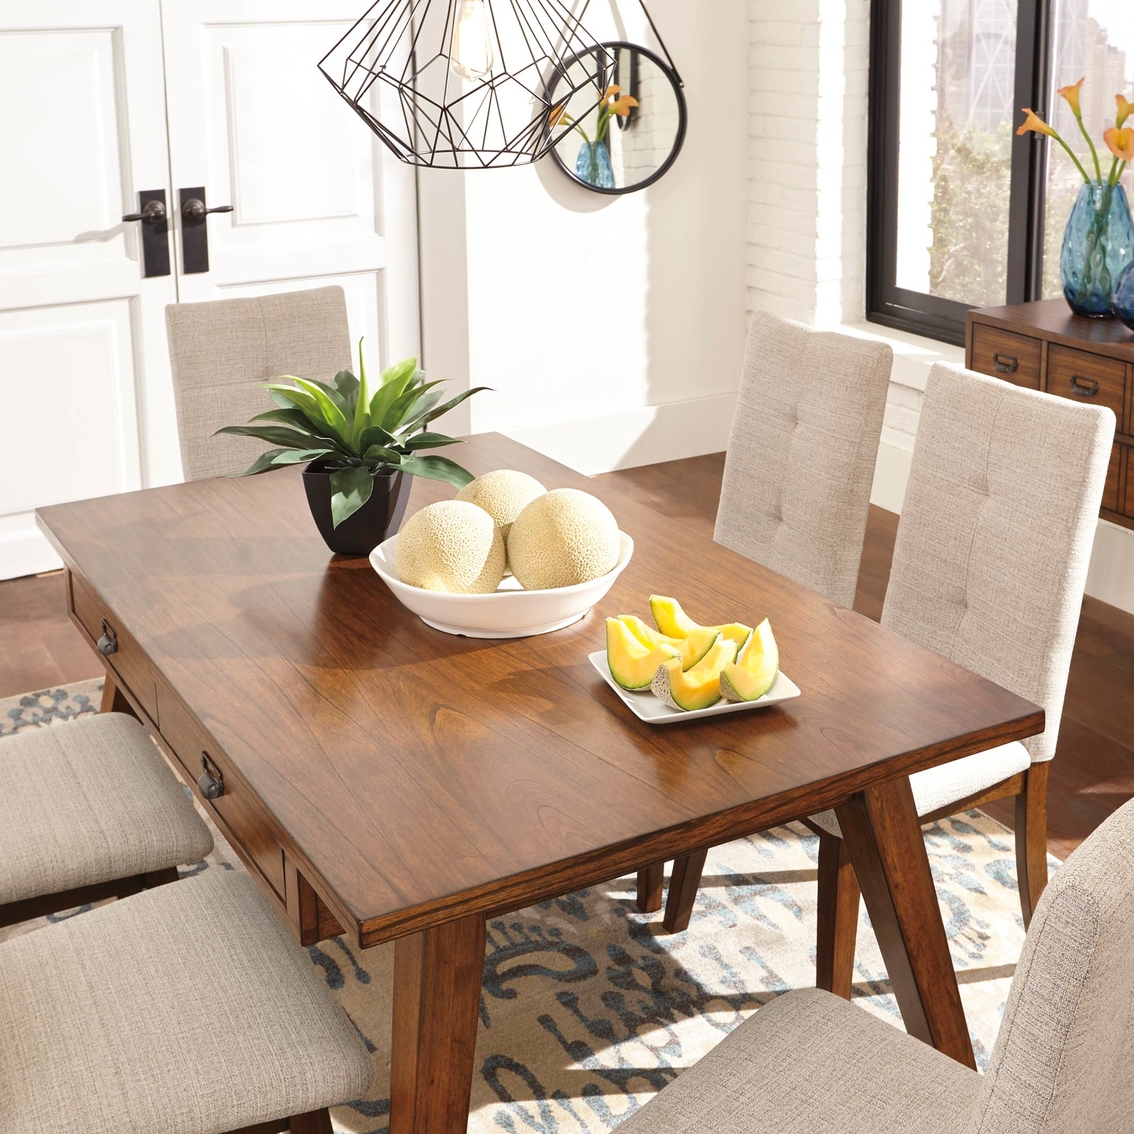 Signature Design by Ashley Centiar Rectangular Dining Table - Image 2 of 4